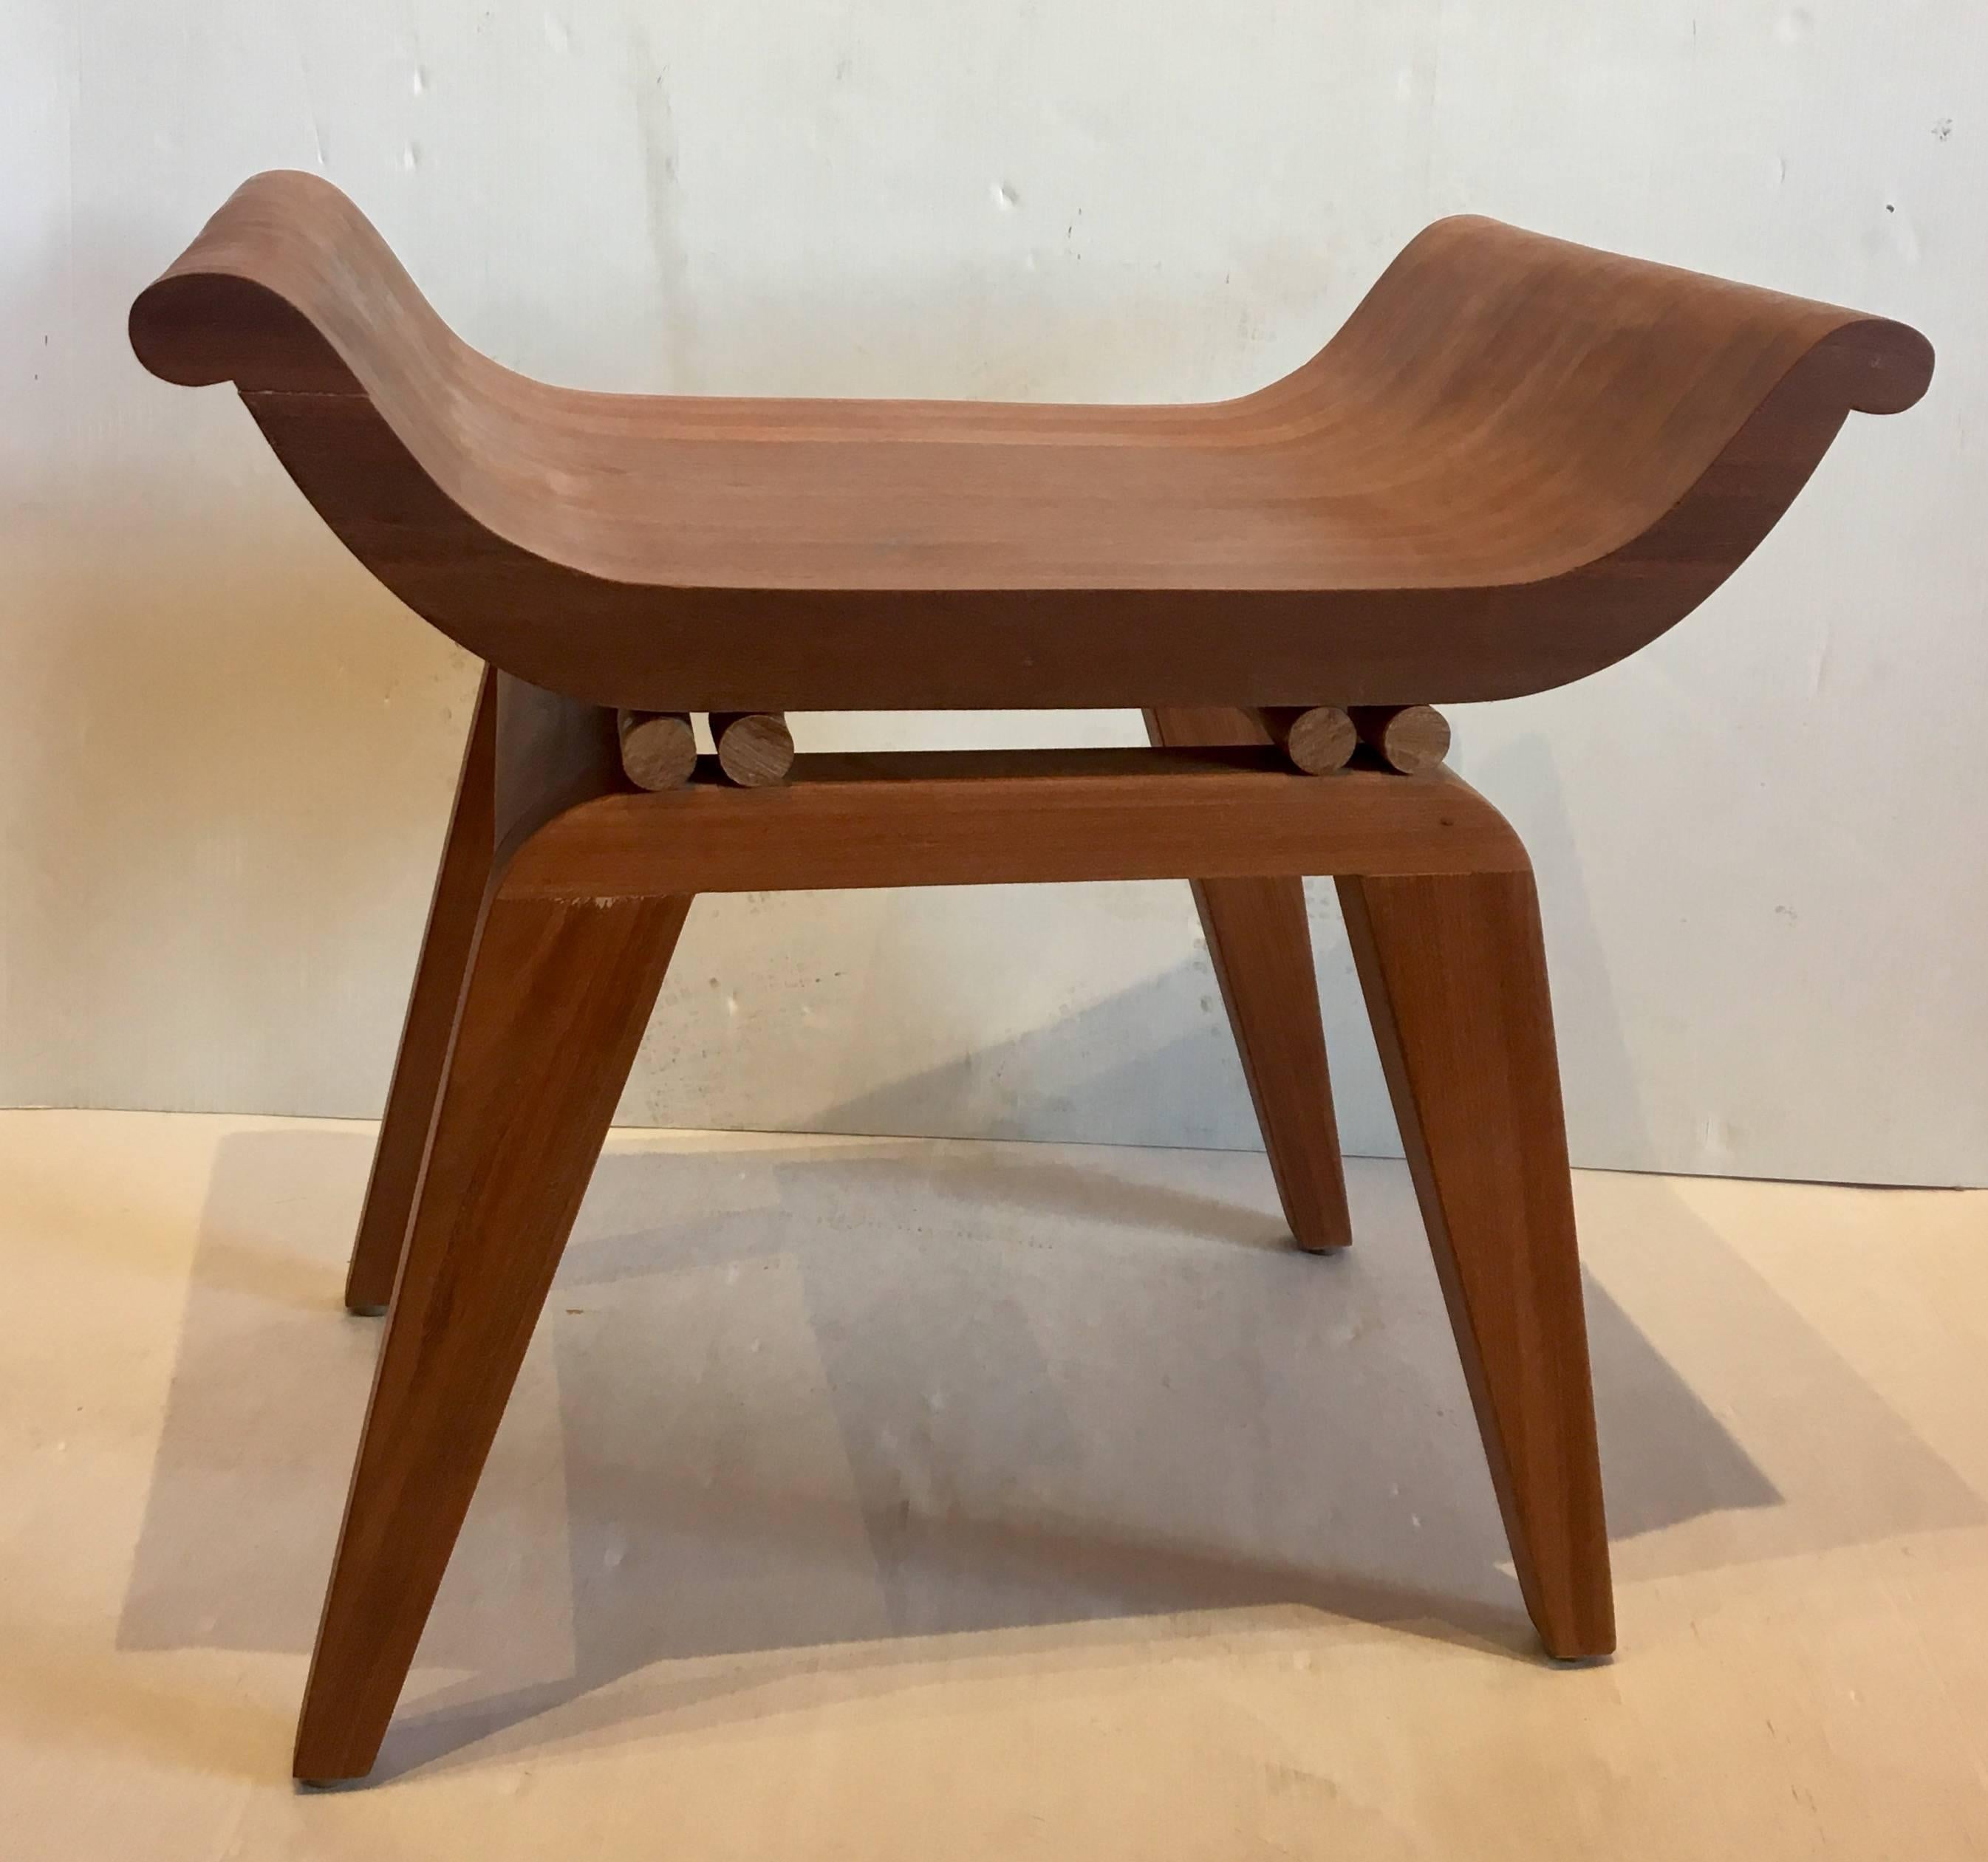 Nicely done solid Mahogany single stool, made in Mexico stamped on the bottom, circa 1970s solid and sturdy original finish, well done piece heavy nice lines.